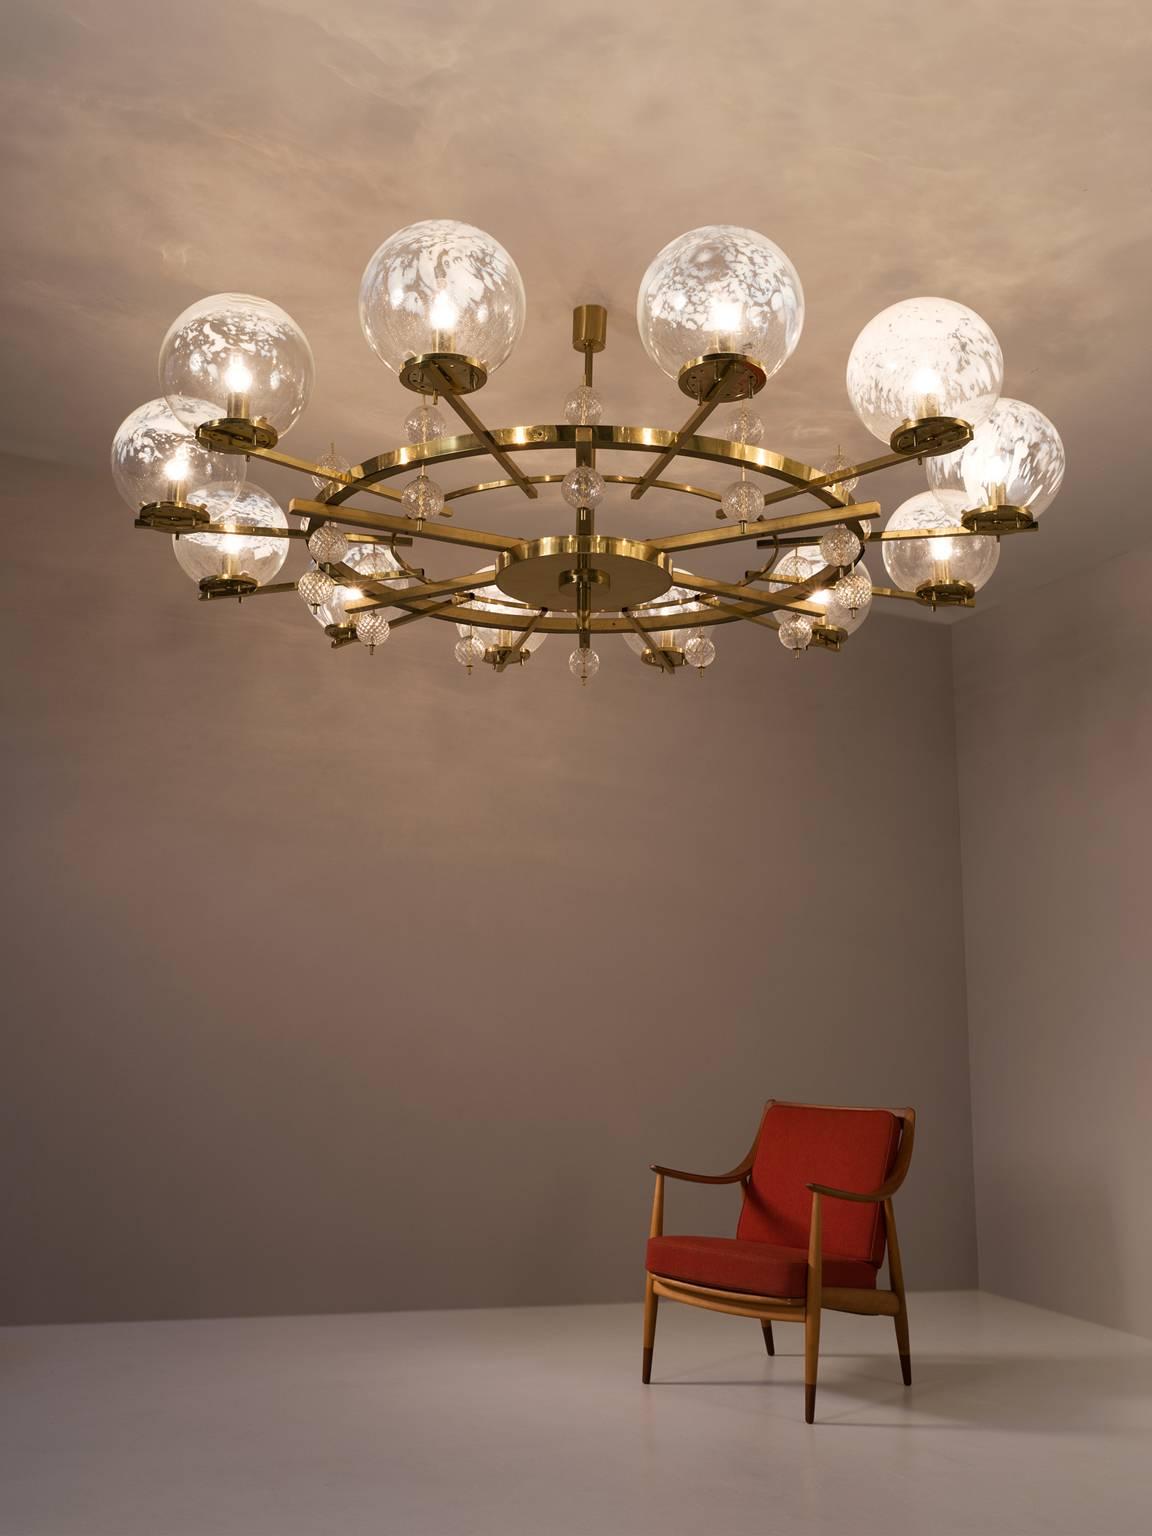 Chandelier, in brass and glass, European, 1970s.

Extreme large chandelier with brass fixture and art-glass. The chandelier with brass frame consist of twelve-light, formed in a circle, with glass shades. The pleasant light it spreads is very